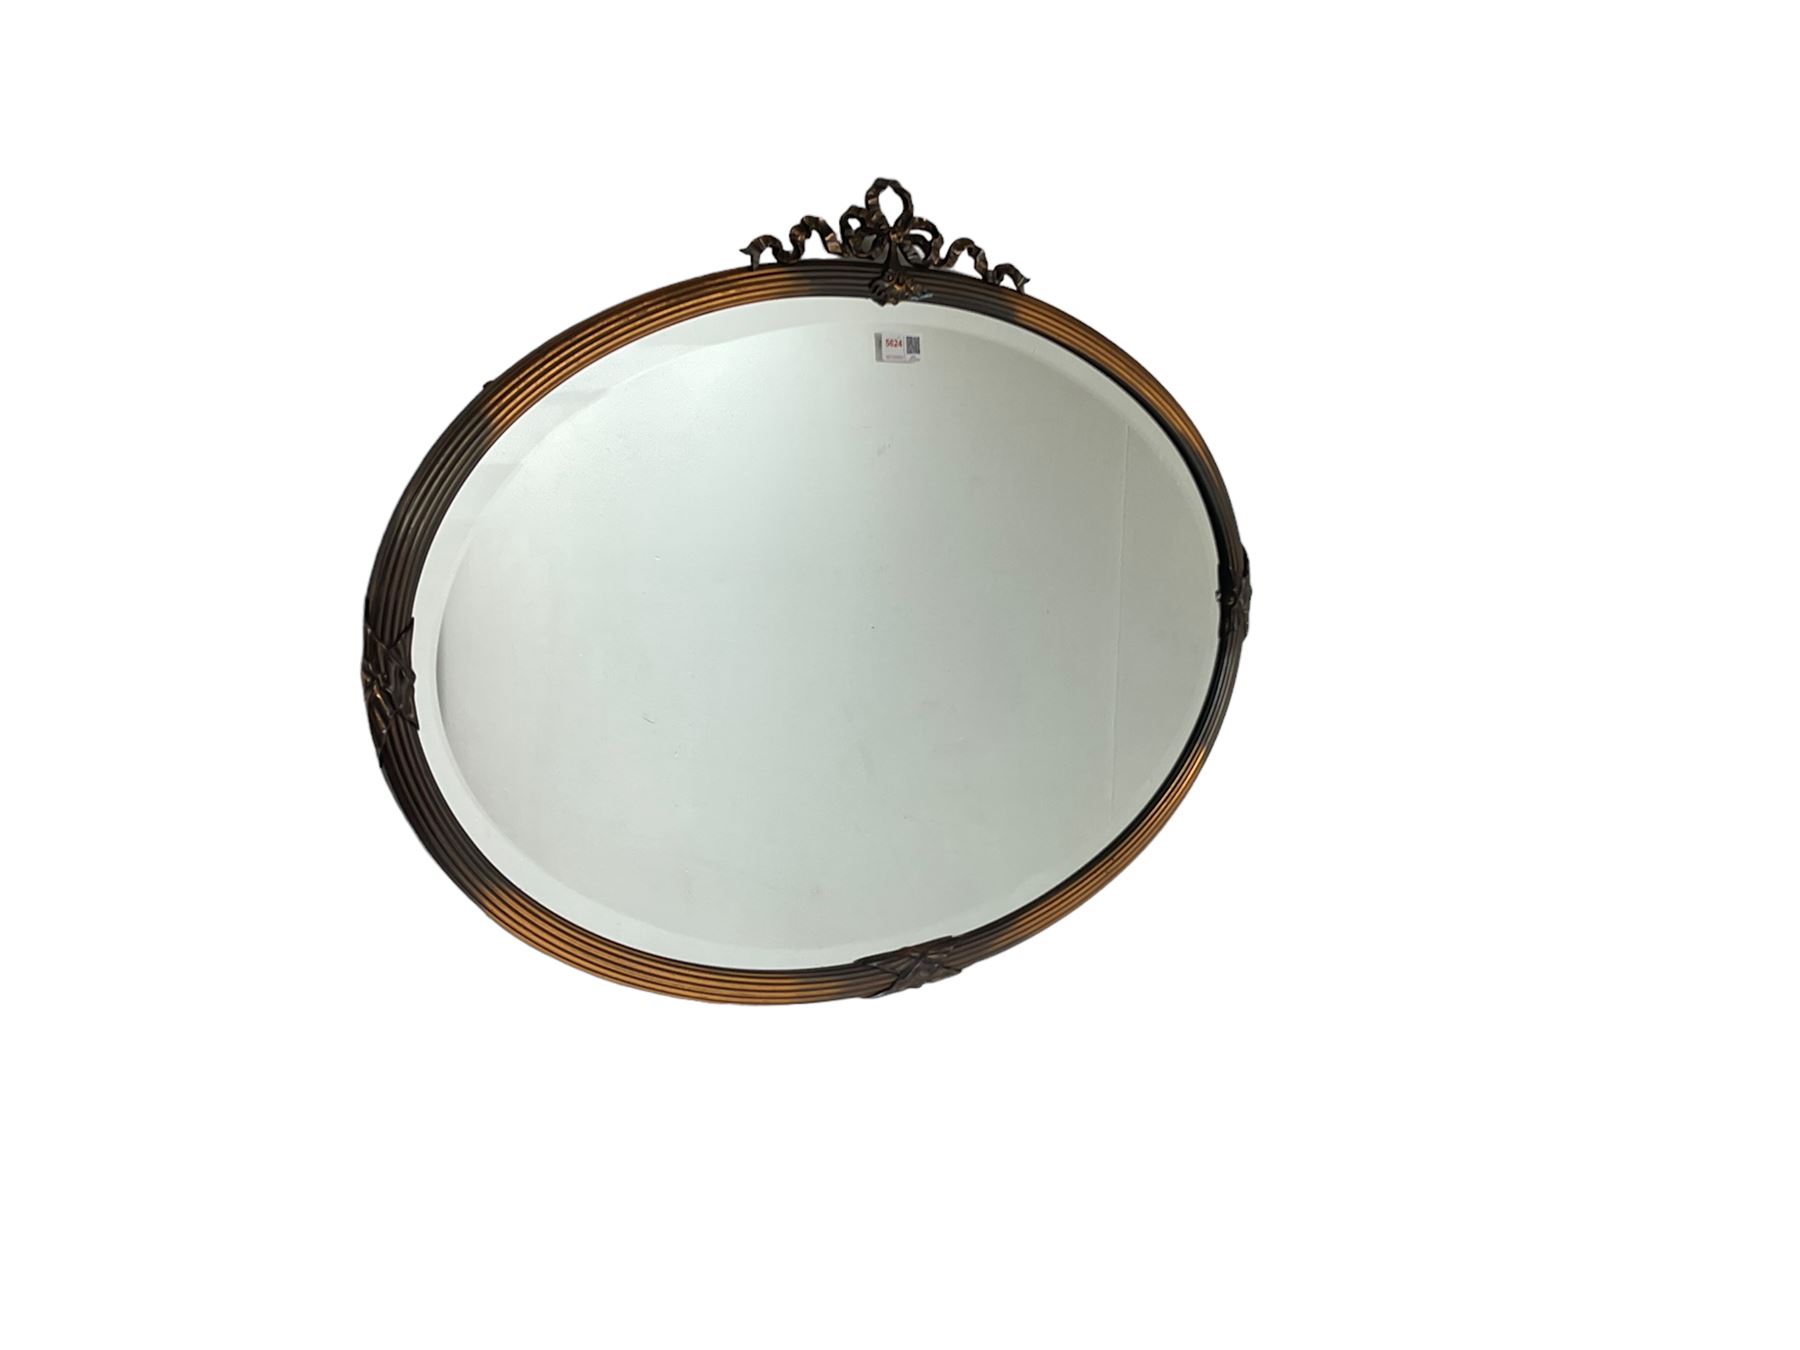 Early 20th century oval wall mirror with ribbon pediment - Image 3 of 3